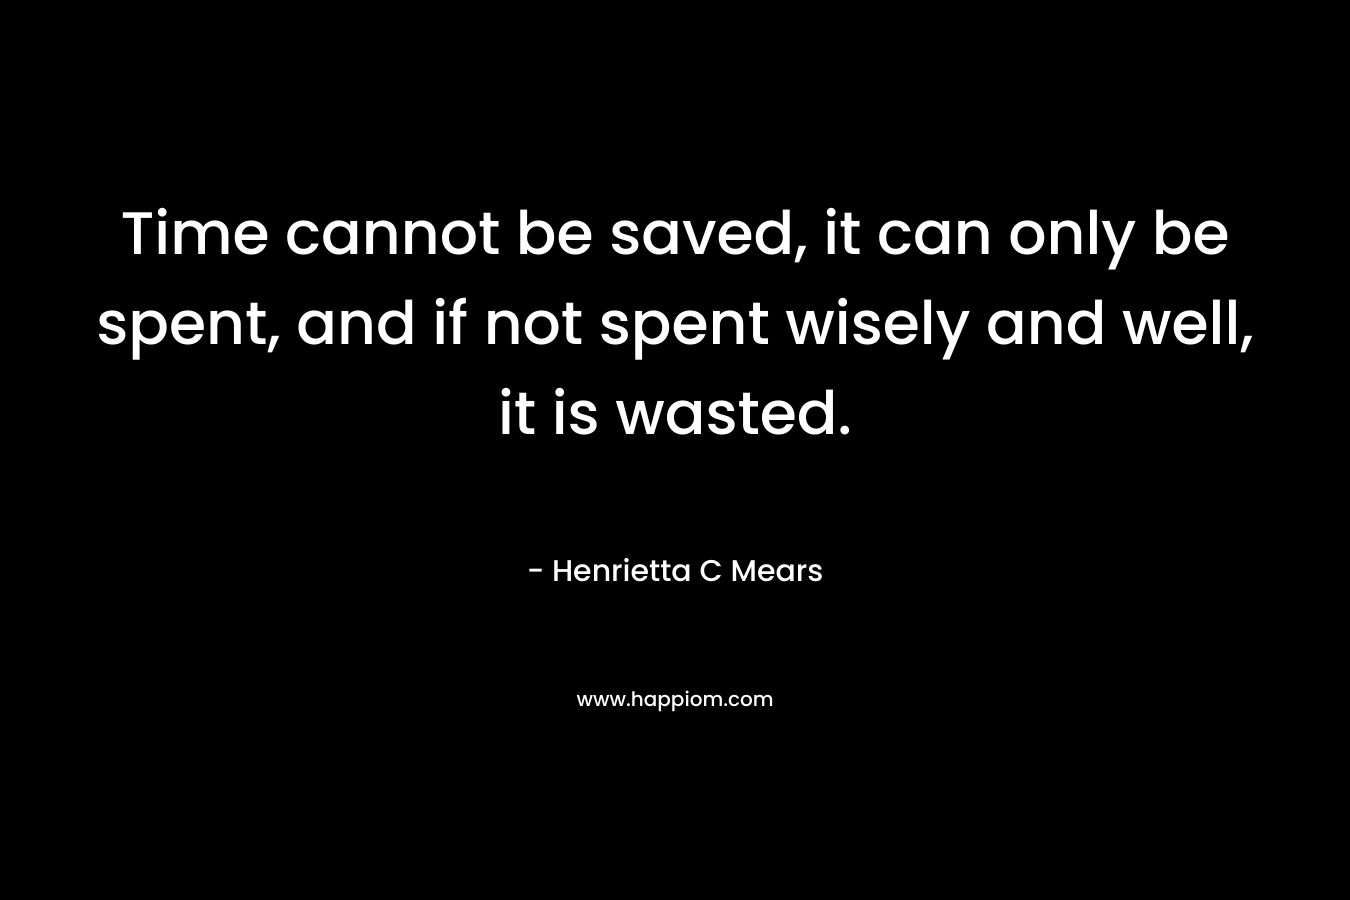 Time cannot be saved, it can only be spent, and if not spent wisely and well, it is wasted.